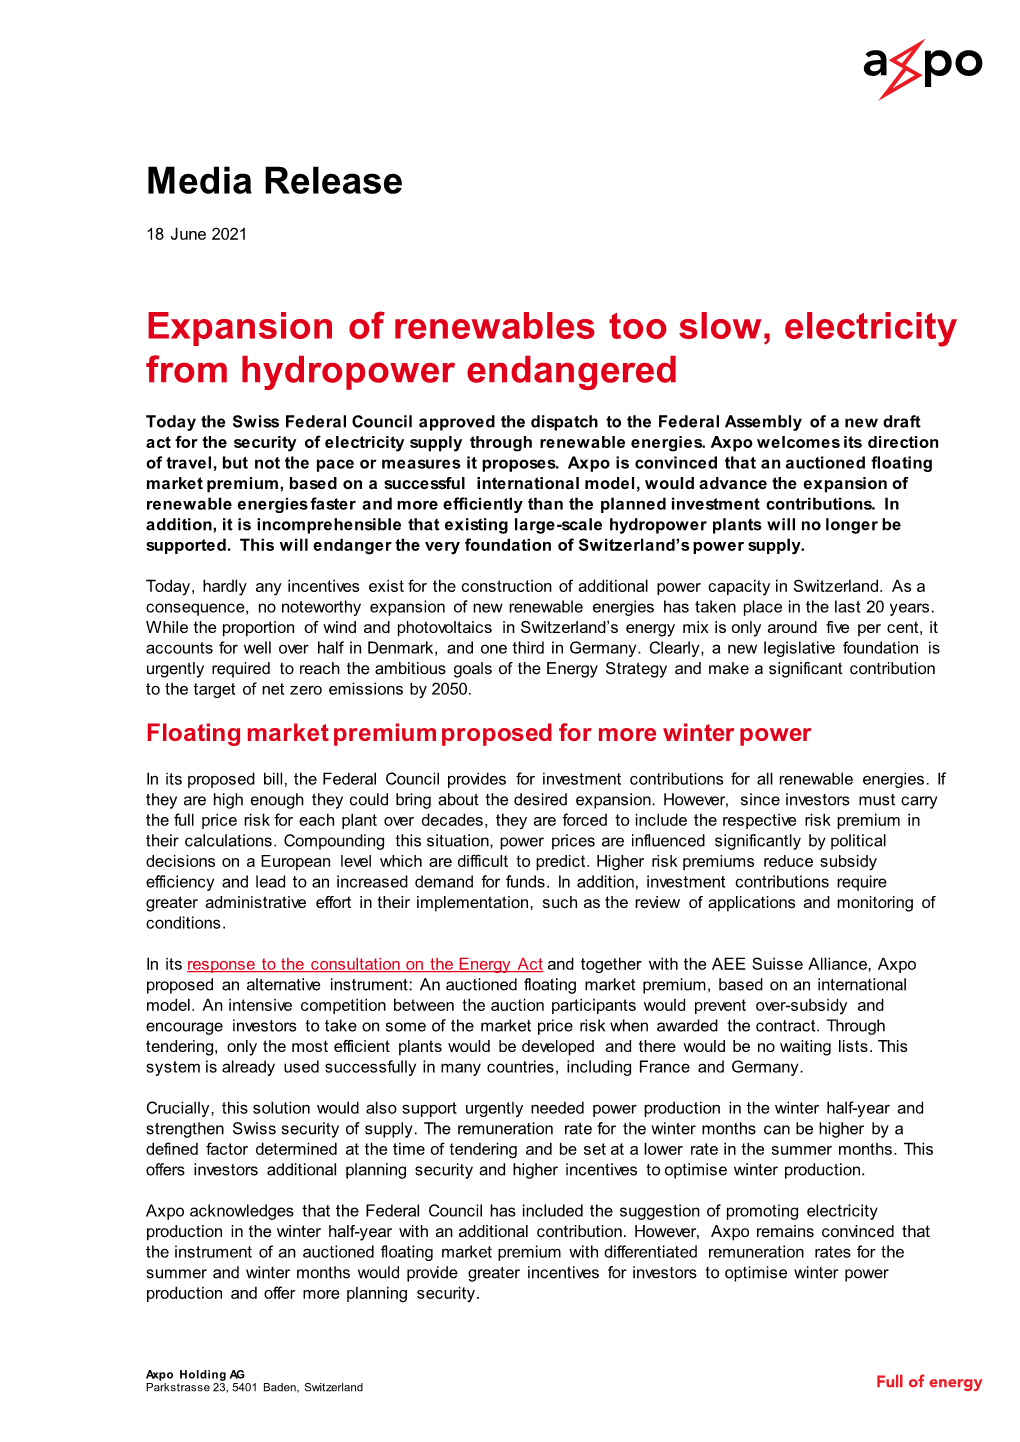 Media Release Expansion of Renewables Too Slow, Electricity